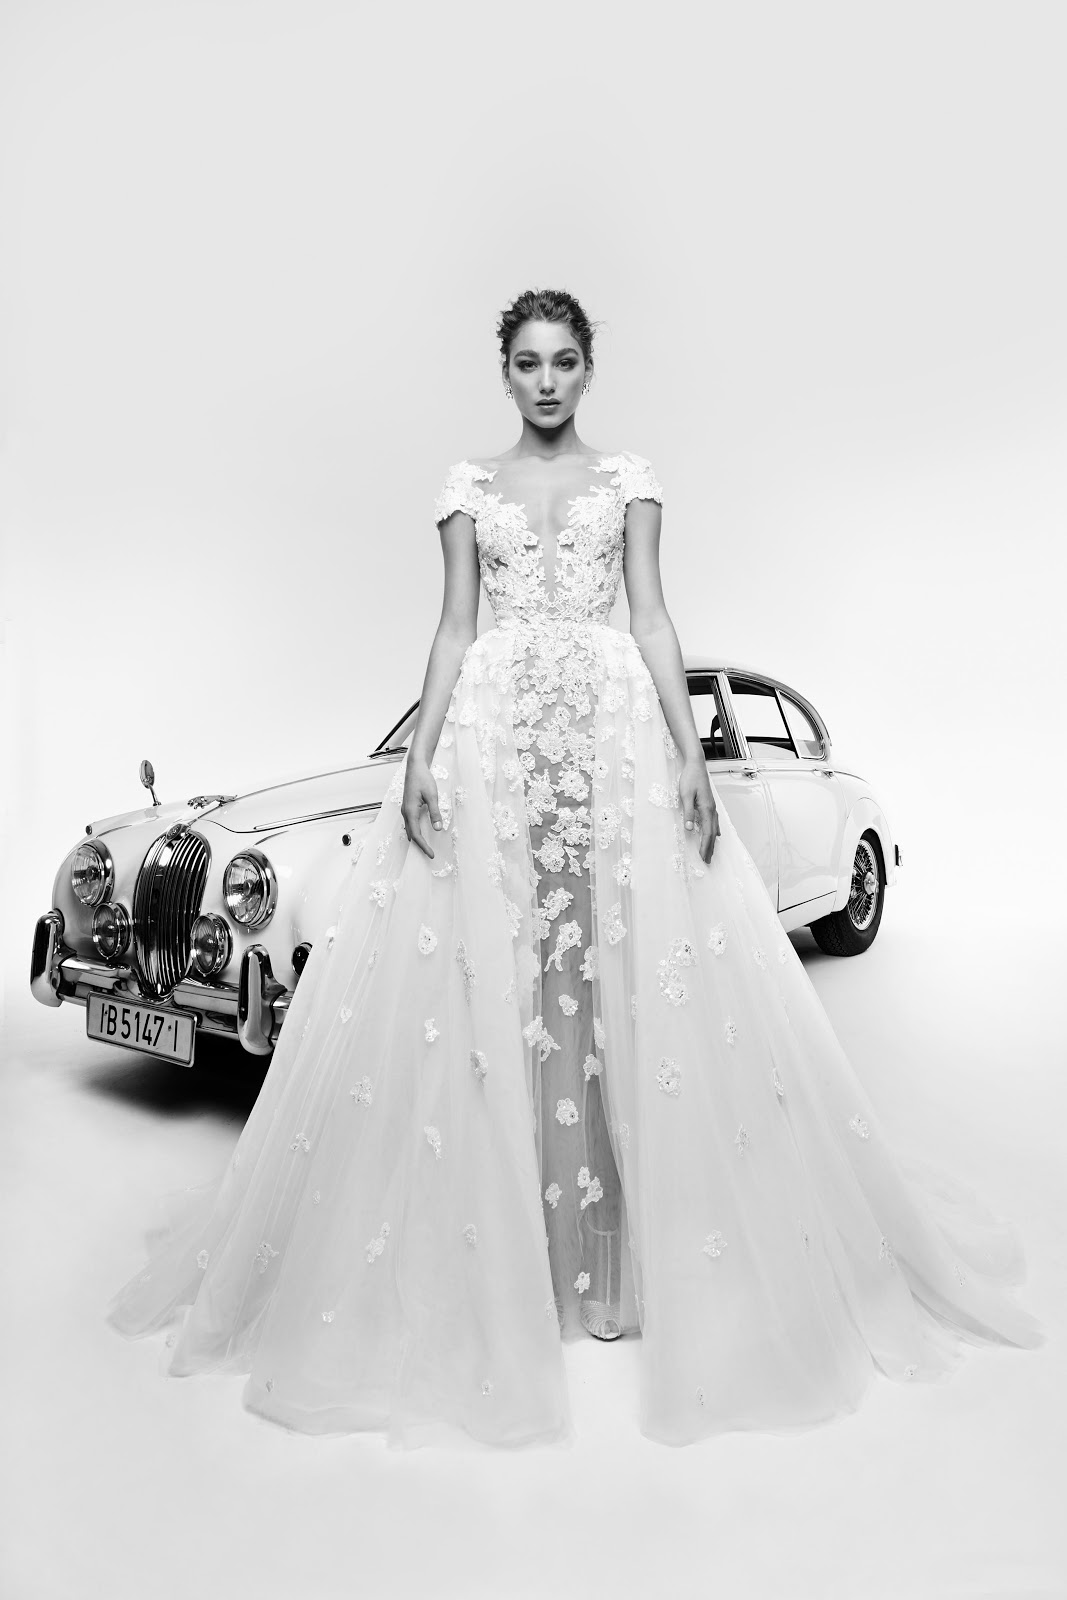 4 Bridal Trends Taking Over the Aisle in 2019 - 5280